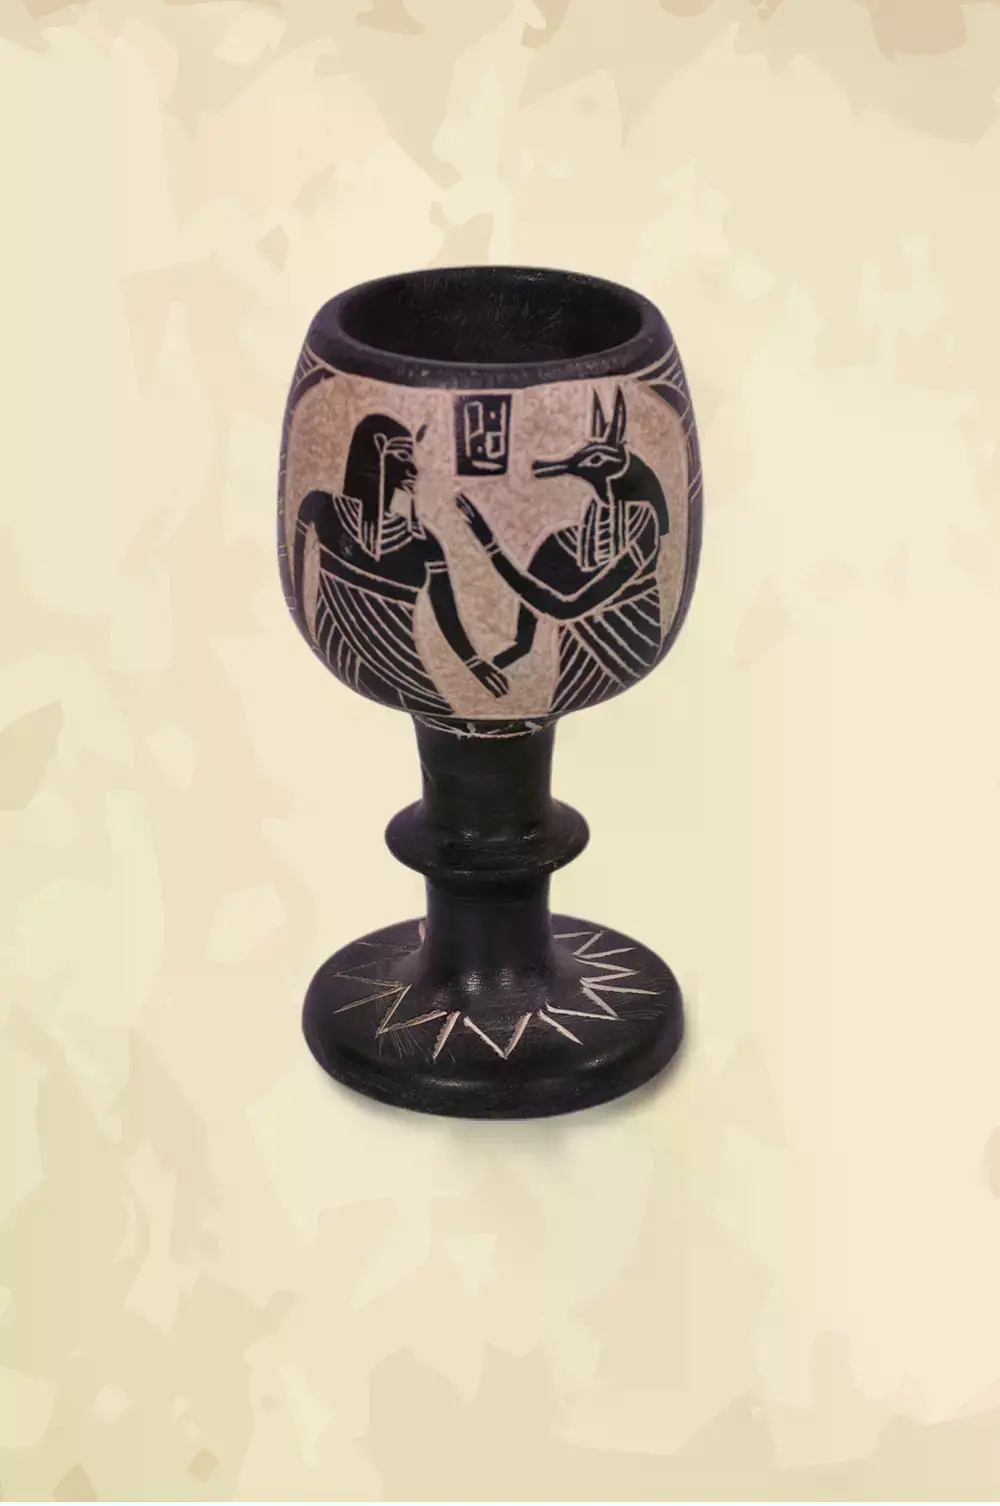 Basalt stone black and white cup with egyptian hieroglyphics